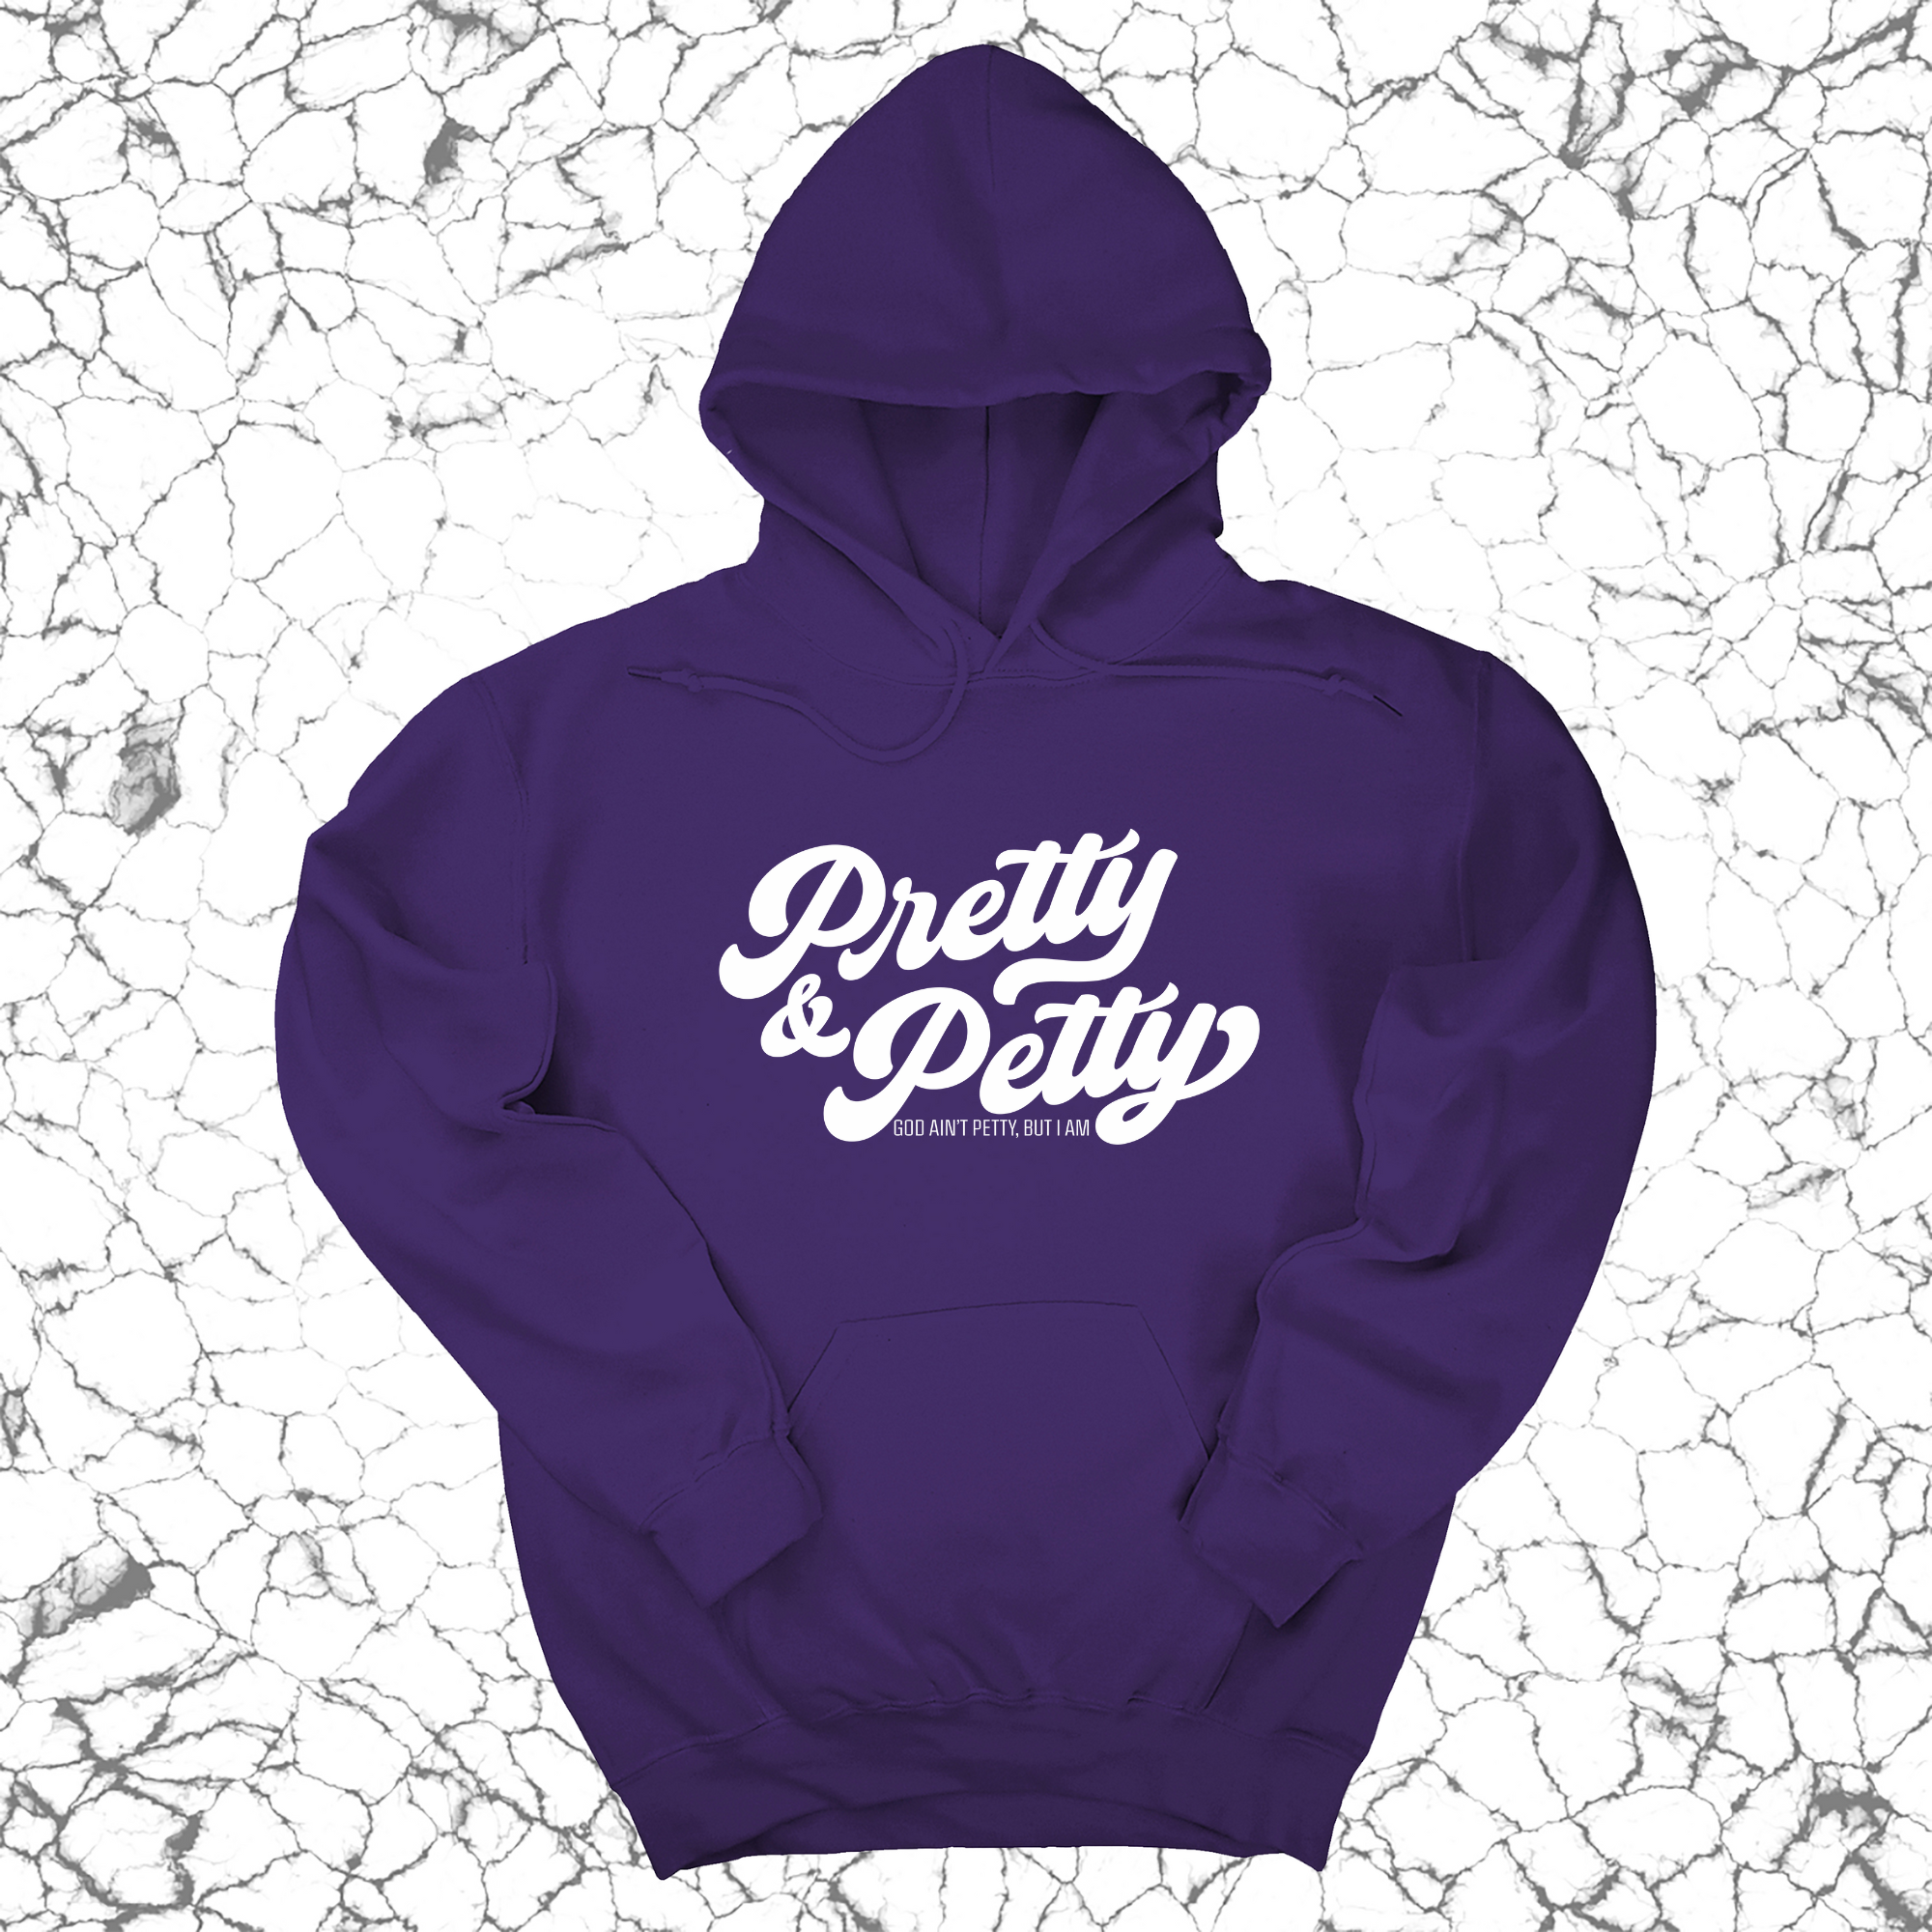 Pretty and Petty Unisex Hoodie-Hoodie-The Original God Ain't Petty But I Am